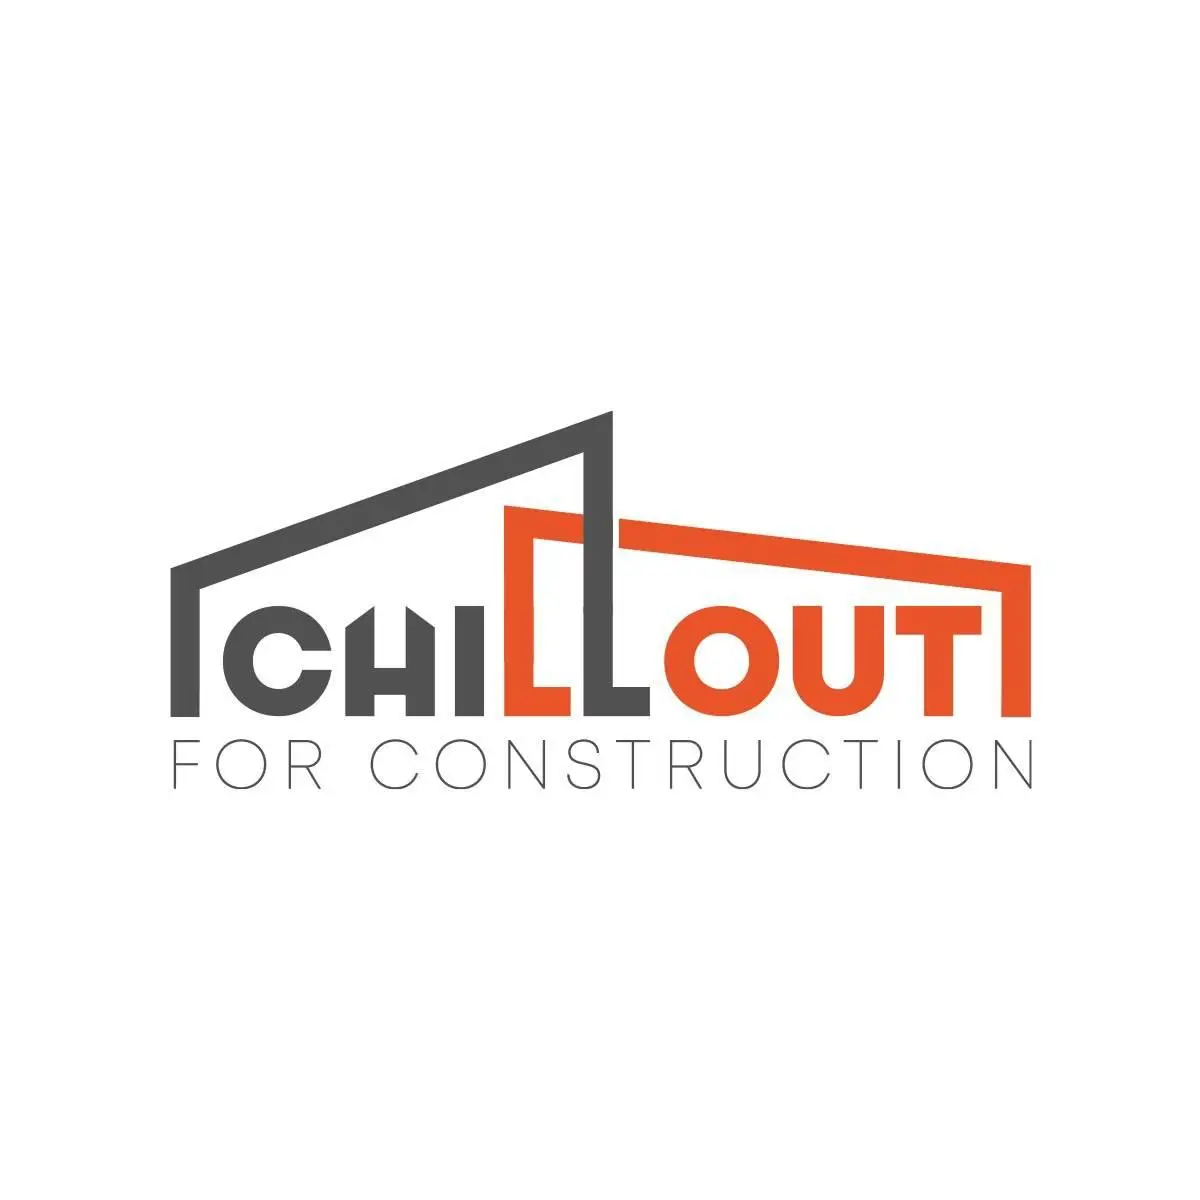 Marketing for construction company in Egypt – Chillout